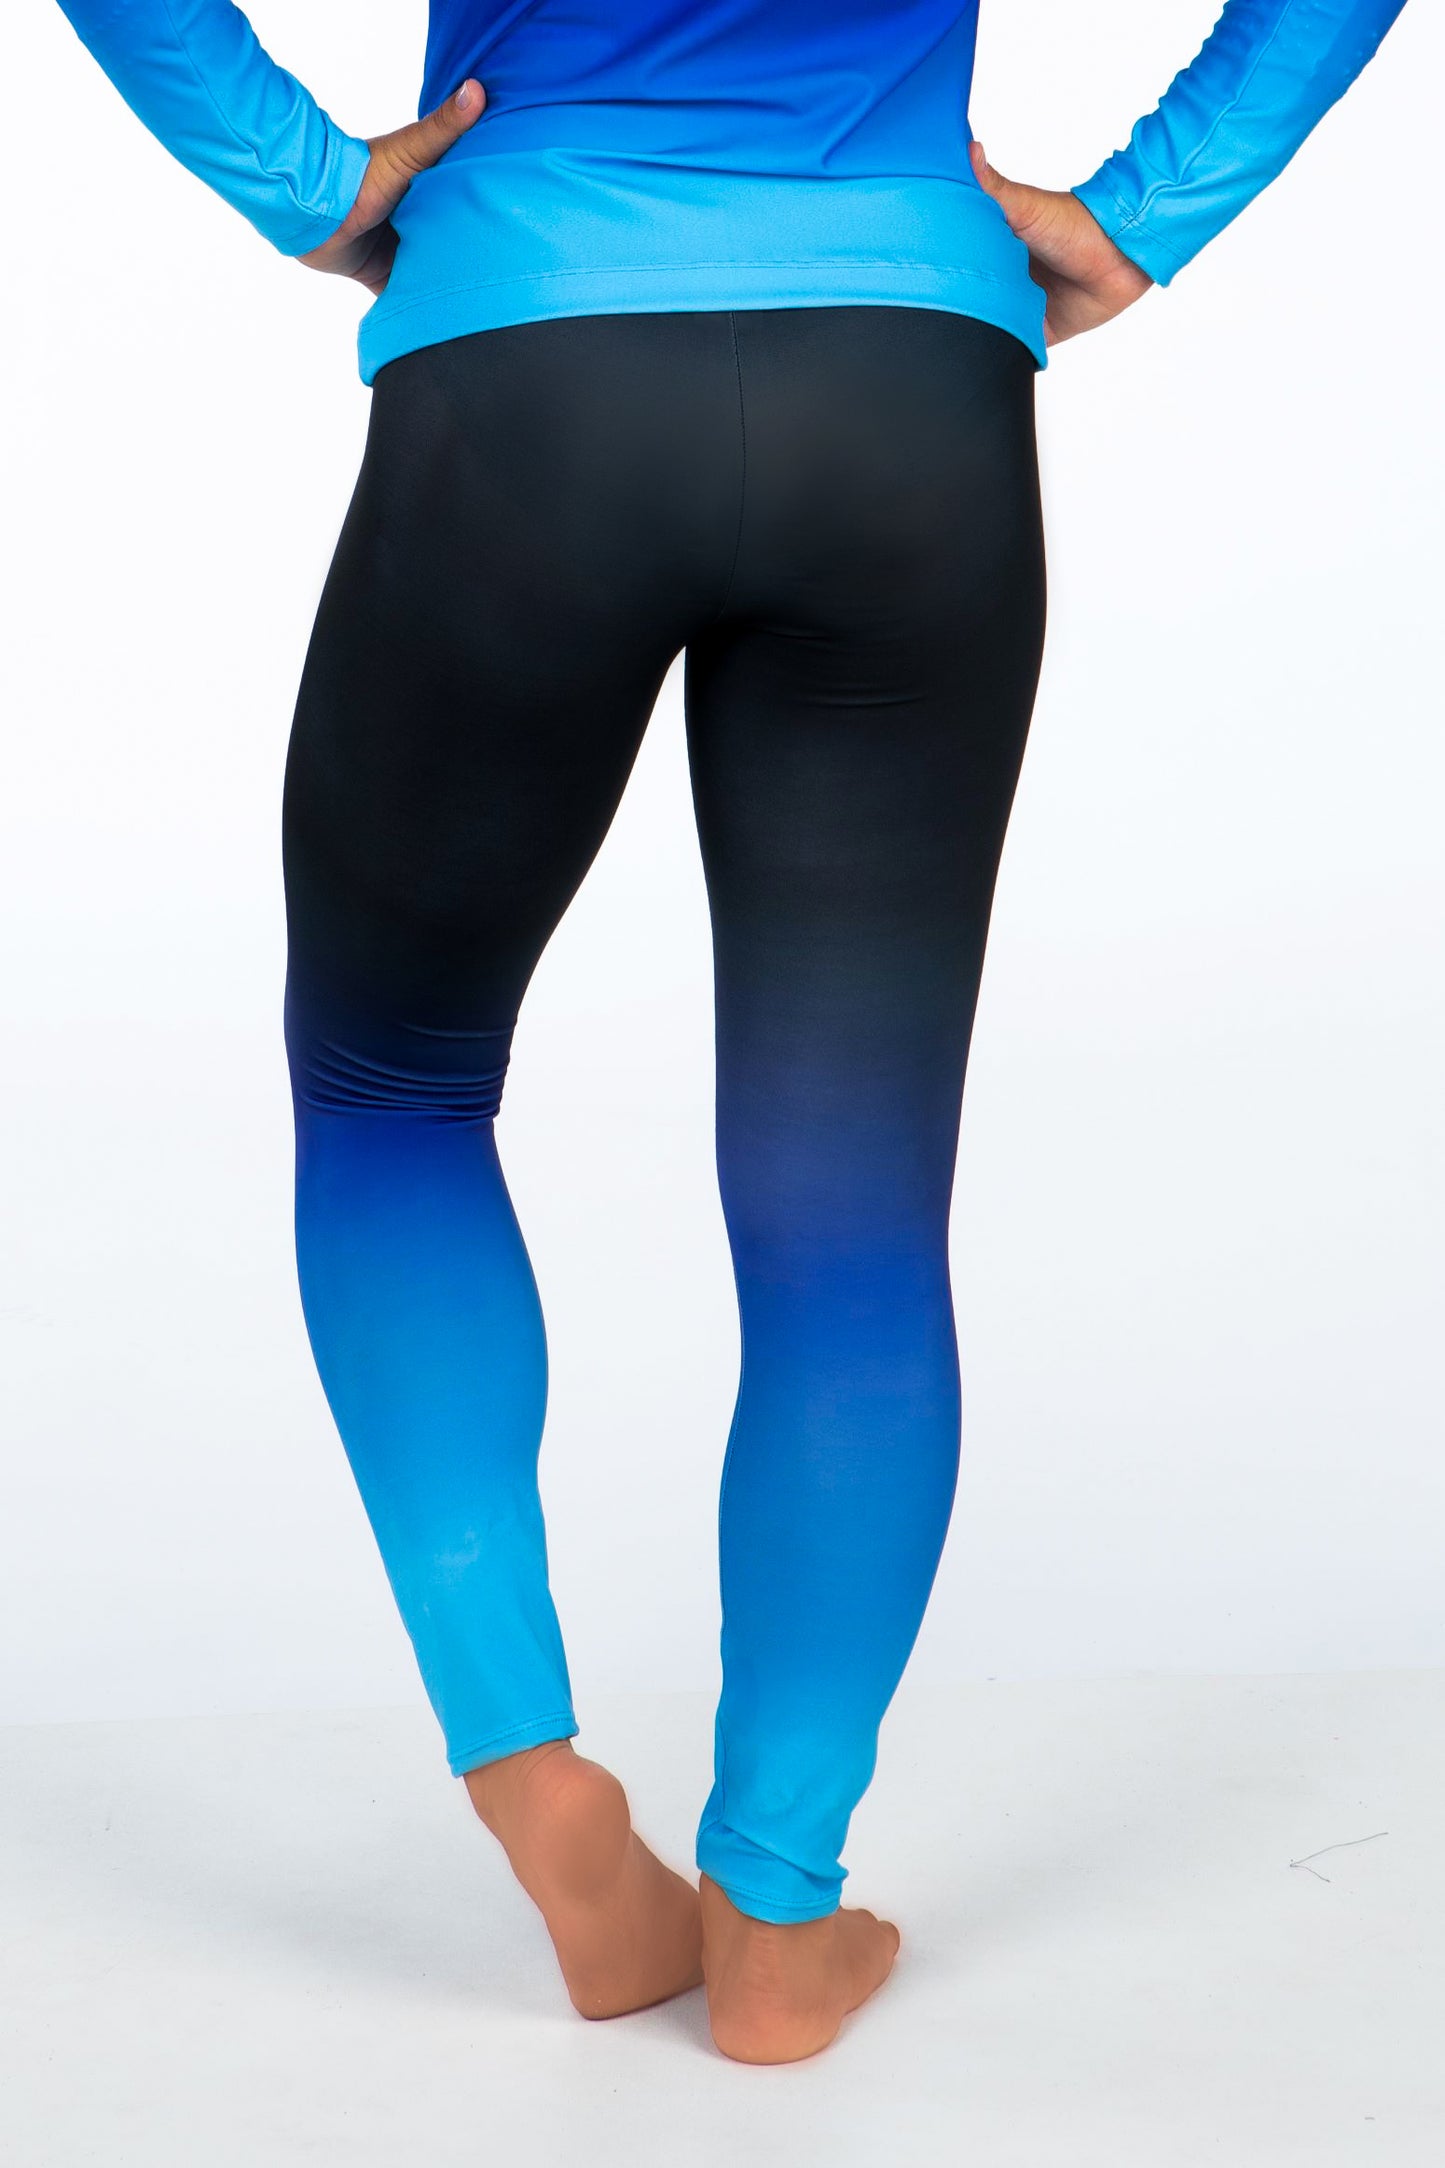 Warm Up Leggings Try on for Size